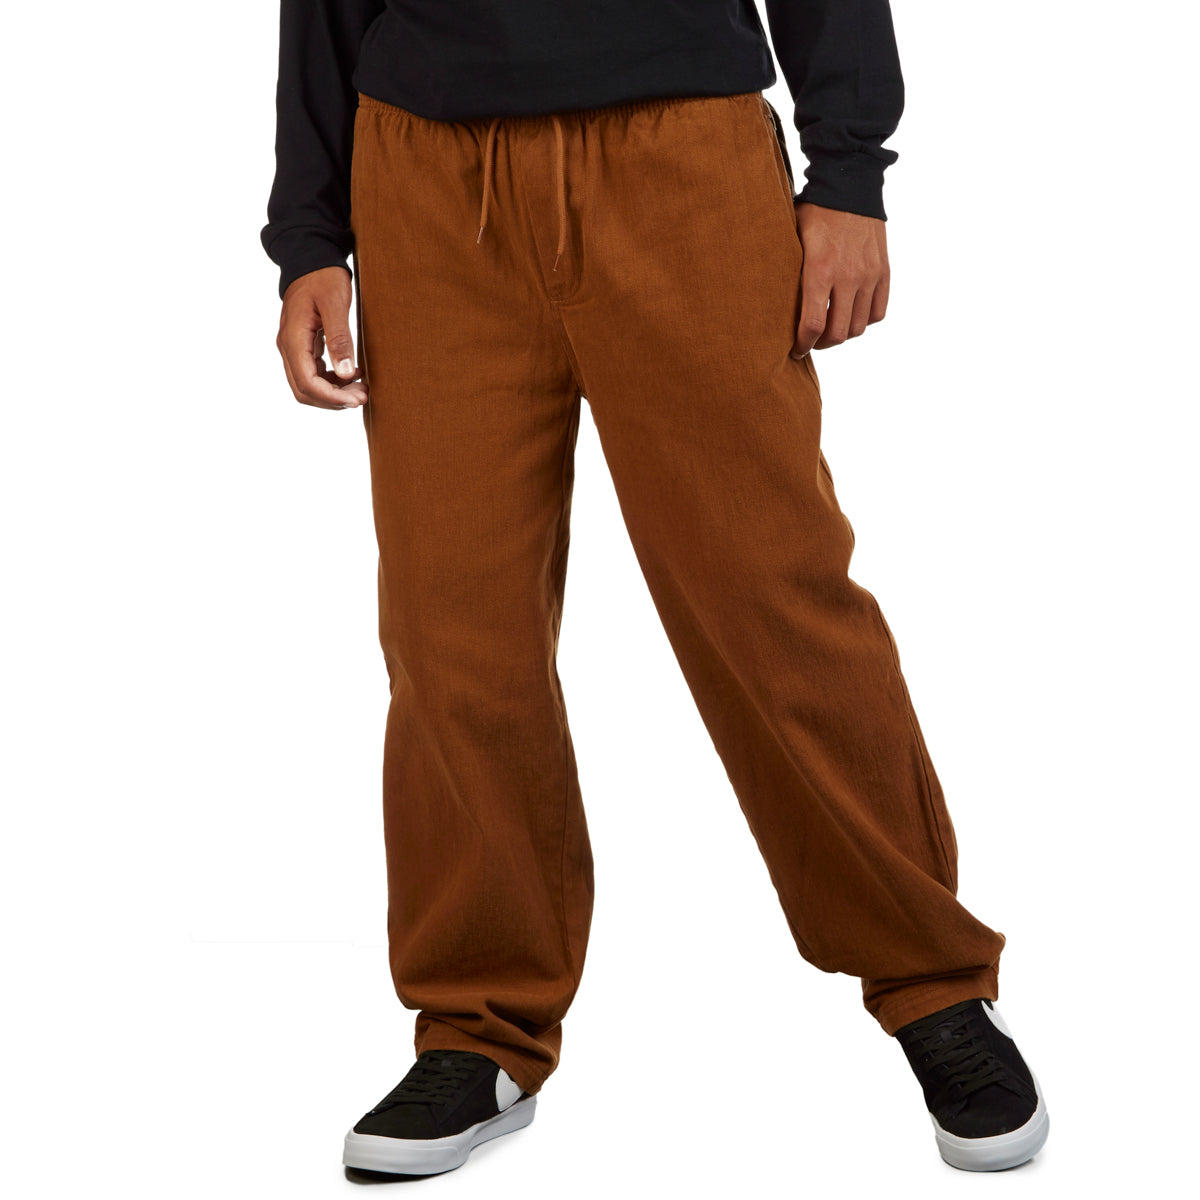 CCS Easy Twill Pants - Duck Brown image 1